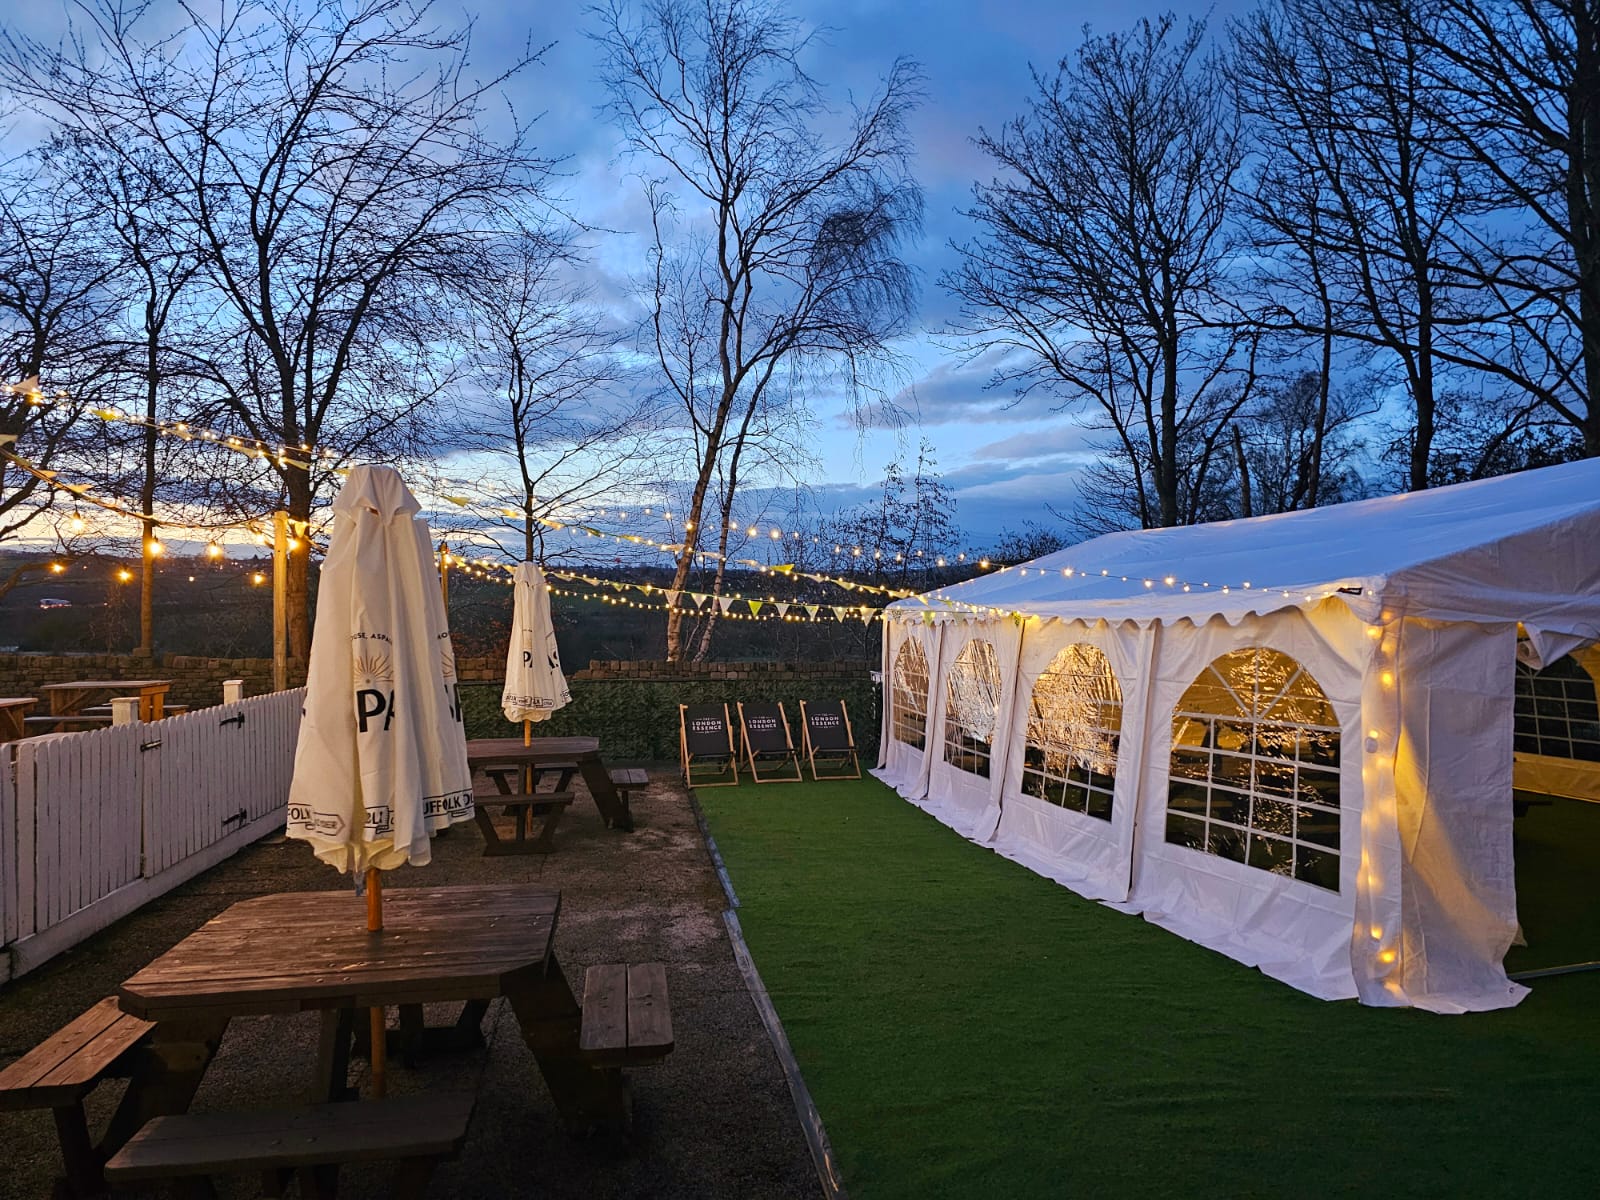 A fairy light lite beer garden with outside seating and a marquee